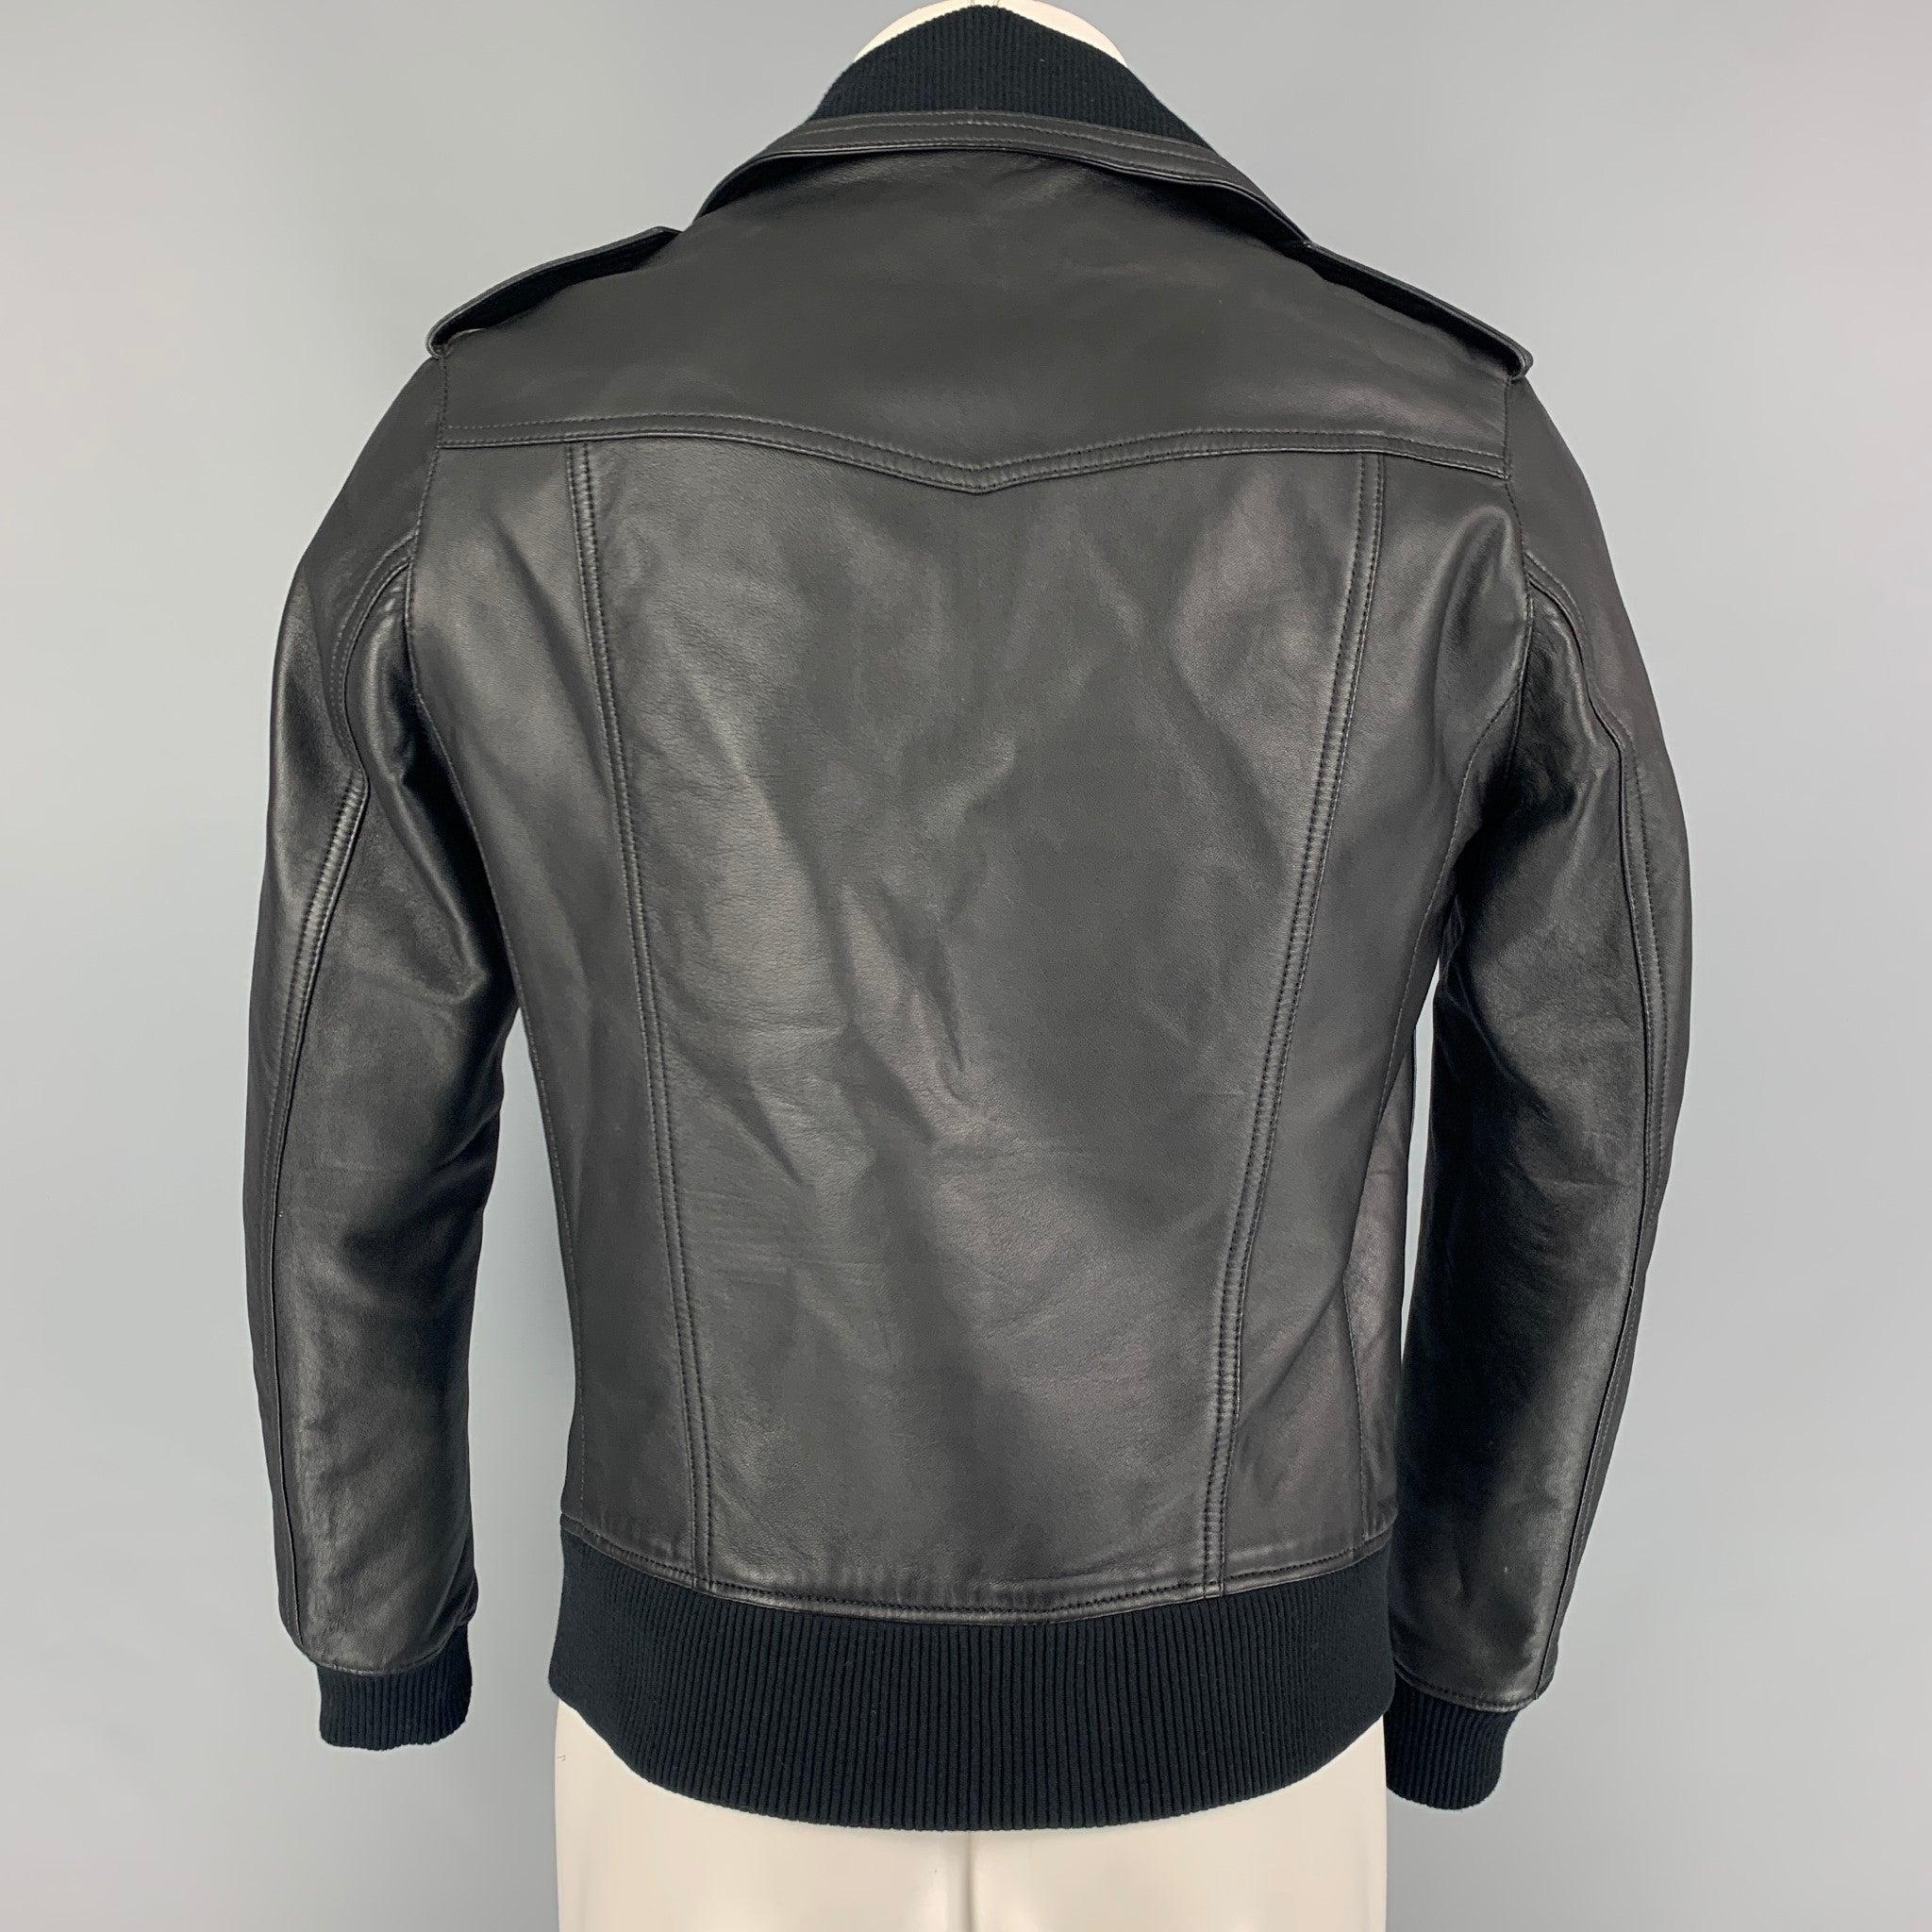 BALMAIN By Olivier Rousteing Size 38 Black Leather Motorcycle Jacket In Good Condition For Sale In San Francisco, CA